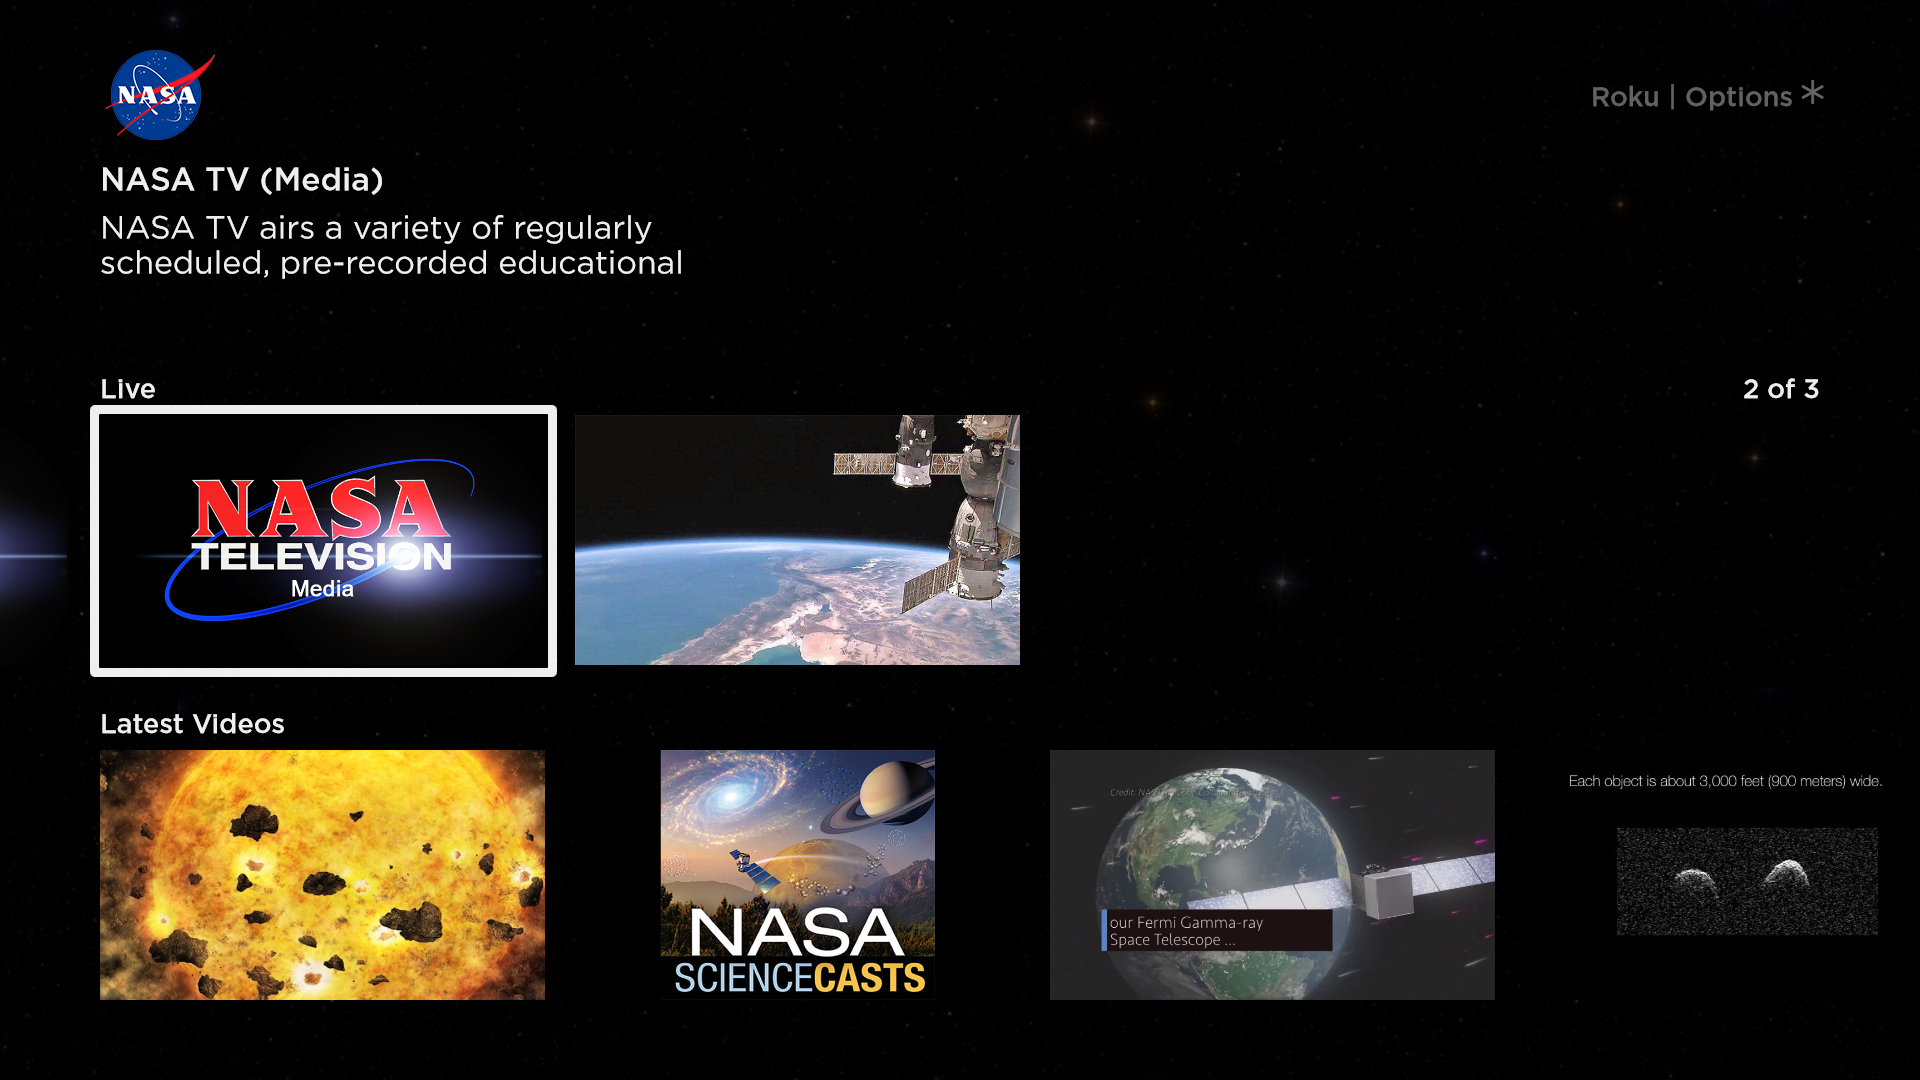 NASA now has a channel for Roku digital media streaming devices